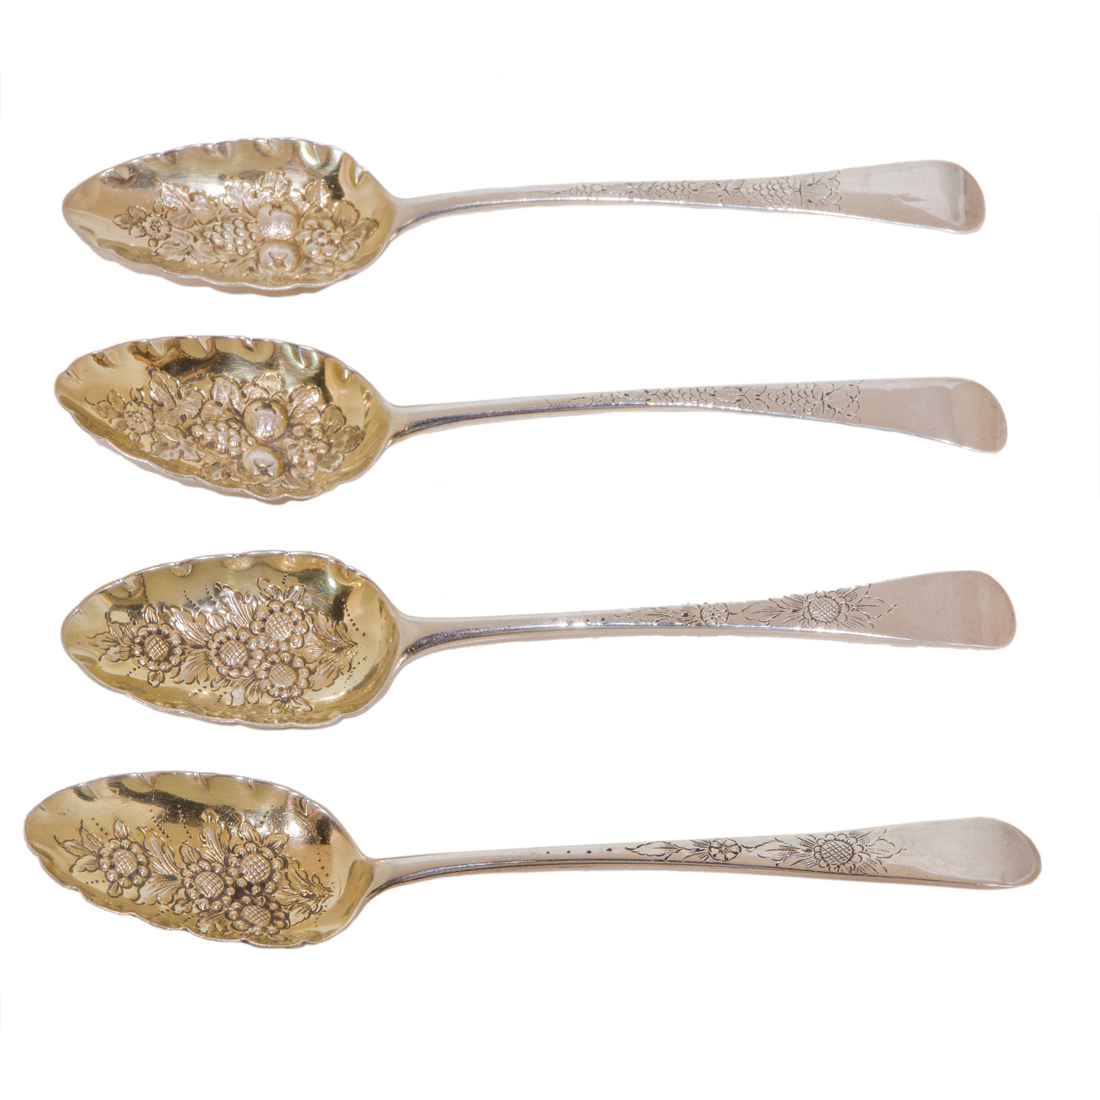 A (SET OF 4) ENGLISH BERRY SPOONS